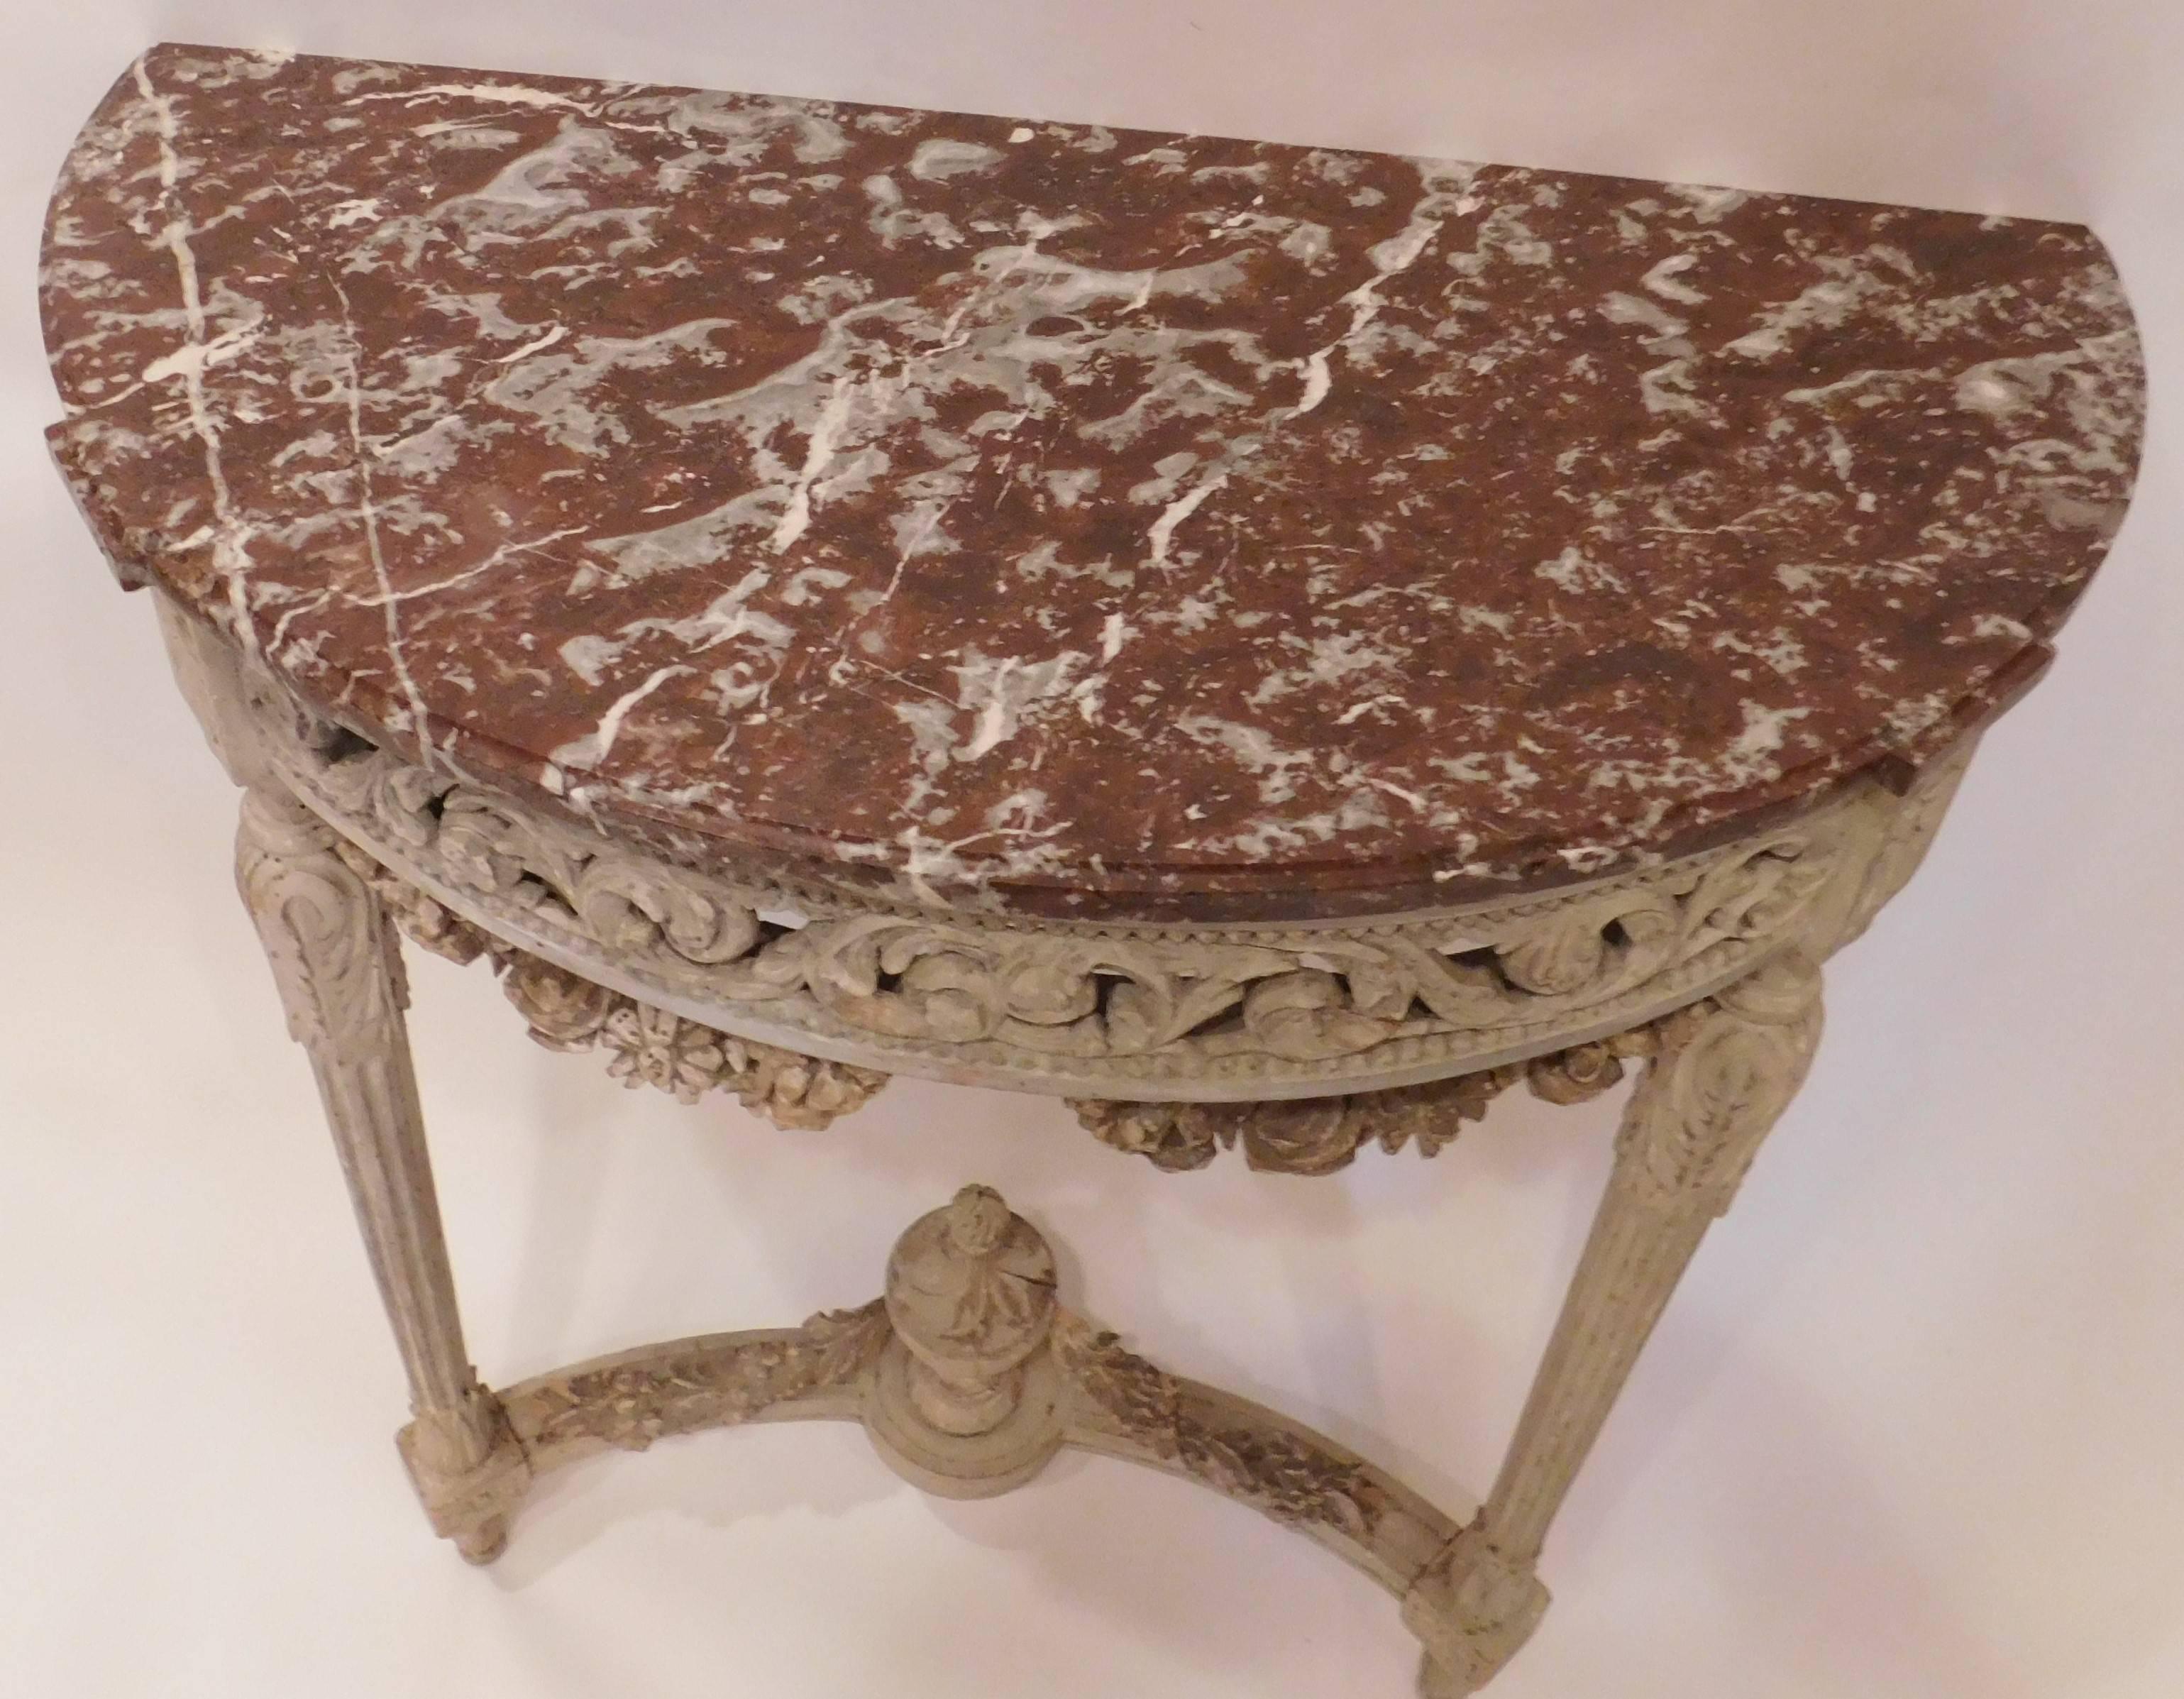 Hand-carved fruitwood with applied ornament beveled edge shaped marble top stretcher with hand-turned urn and applied garland skirt has excellent pierced carving soft grayed white made in either France or Italy wall-mounted with two legs.